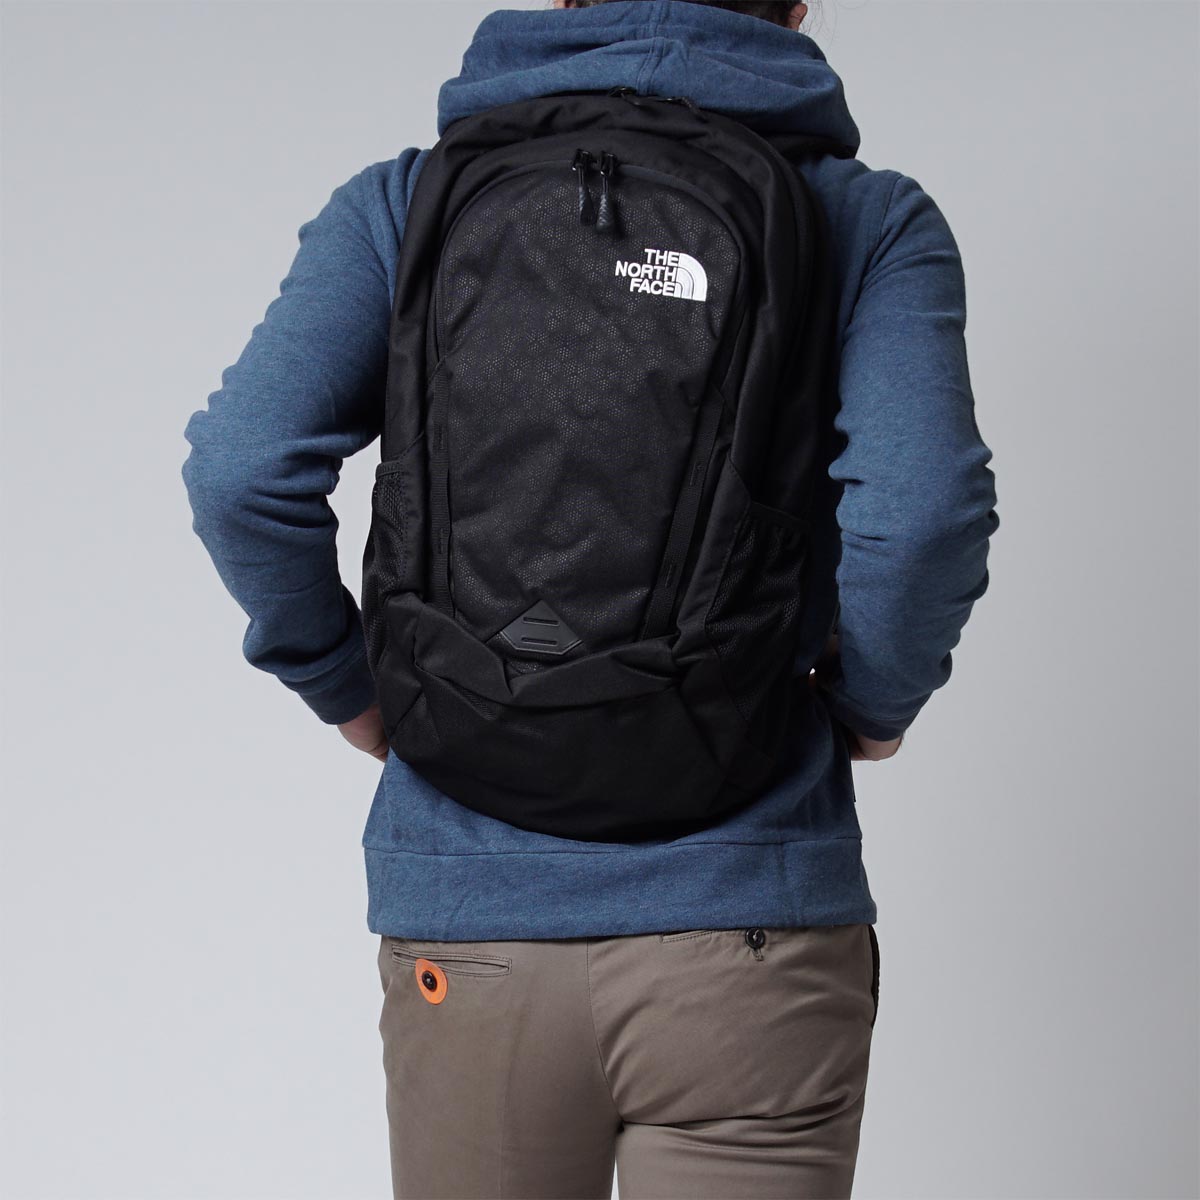 15 Best North Face Backpacks Reviewed in 2018 | TheGearHunt